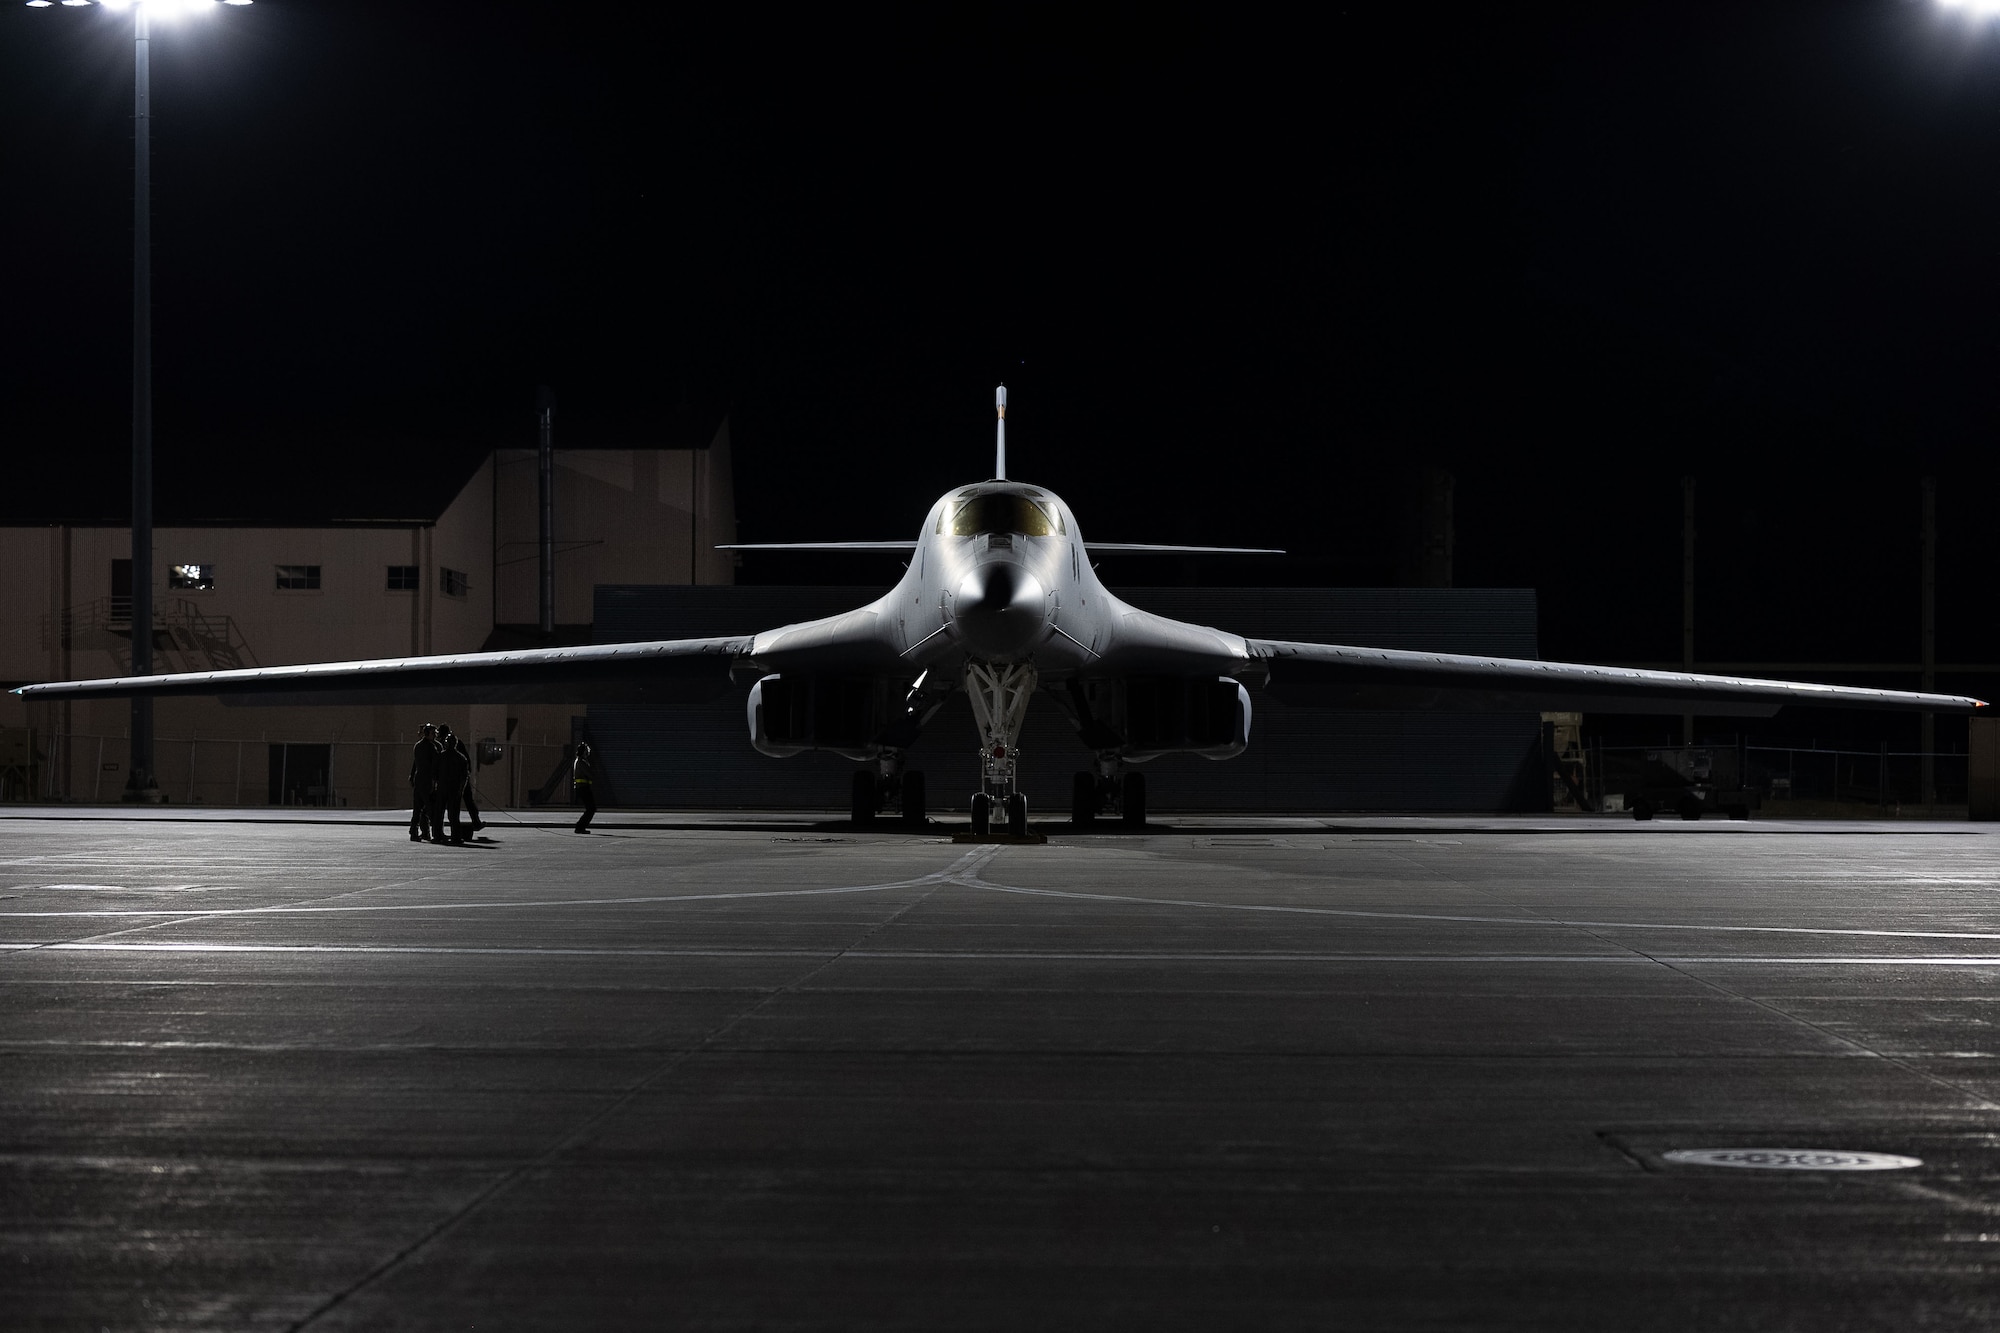 A U.S. Air Force B-1B Lancer from the 28th Bomb Wing, prepares for take off from Ellsworth Air Force Base, South Dakota, April 12, 2023. Bomber missions provide opportunities to train and work with our allies and partners in joint and coalition operations and exercises. (U.S. Air Force photo by Senior Airman Austin McIntosh)